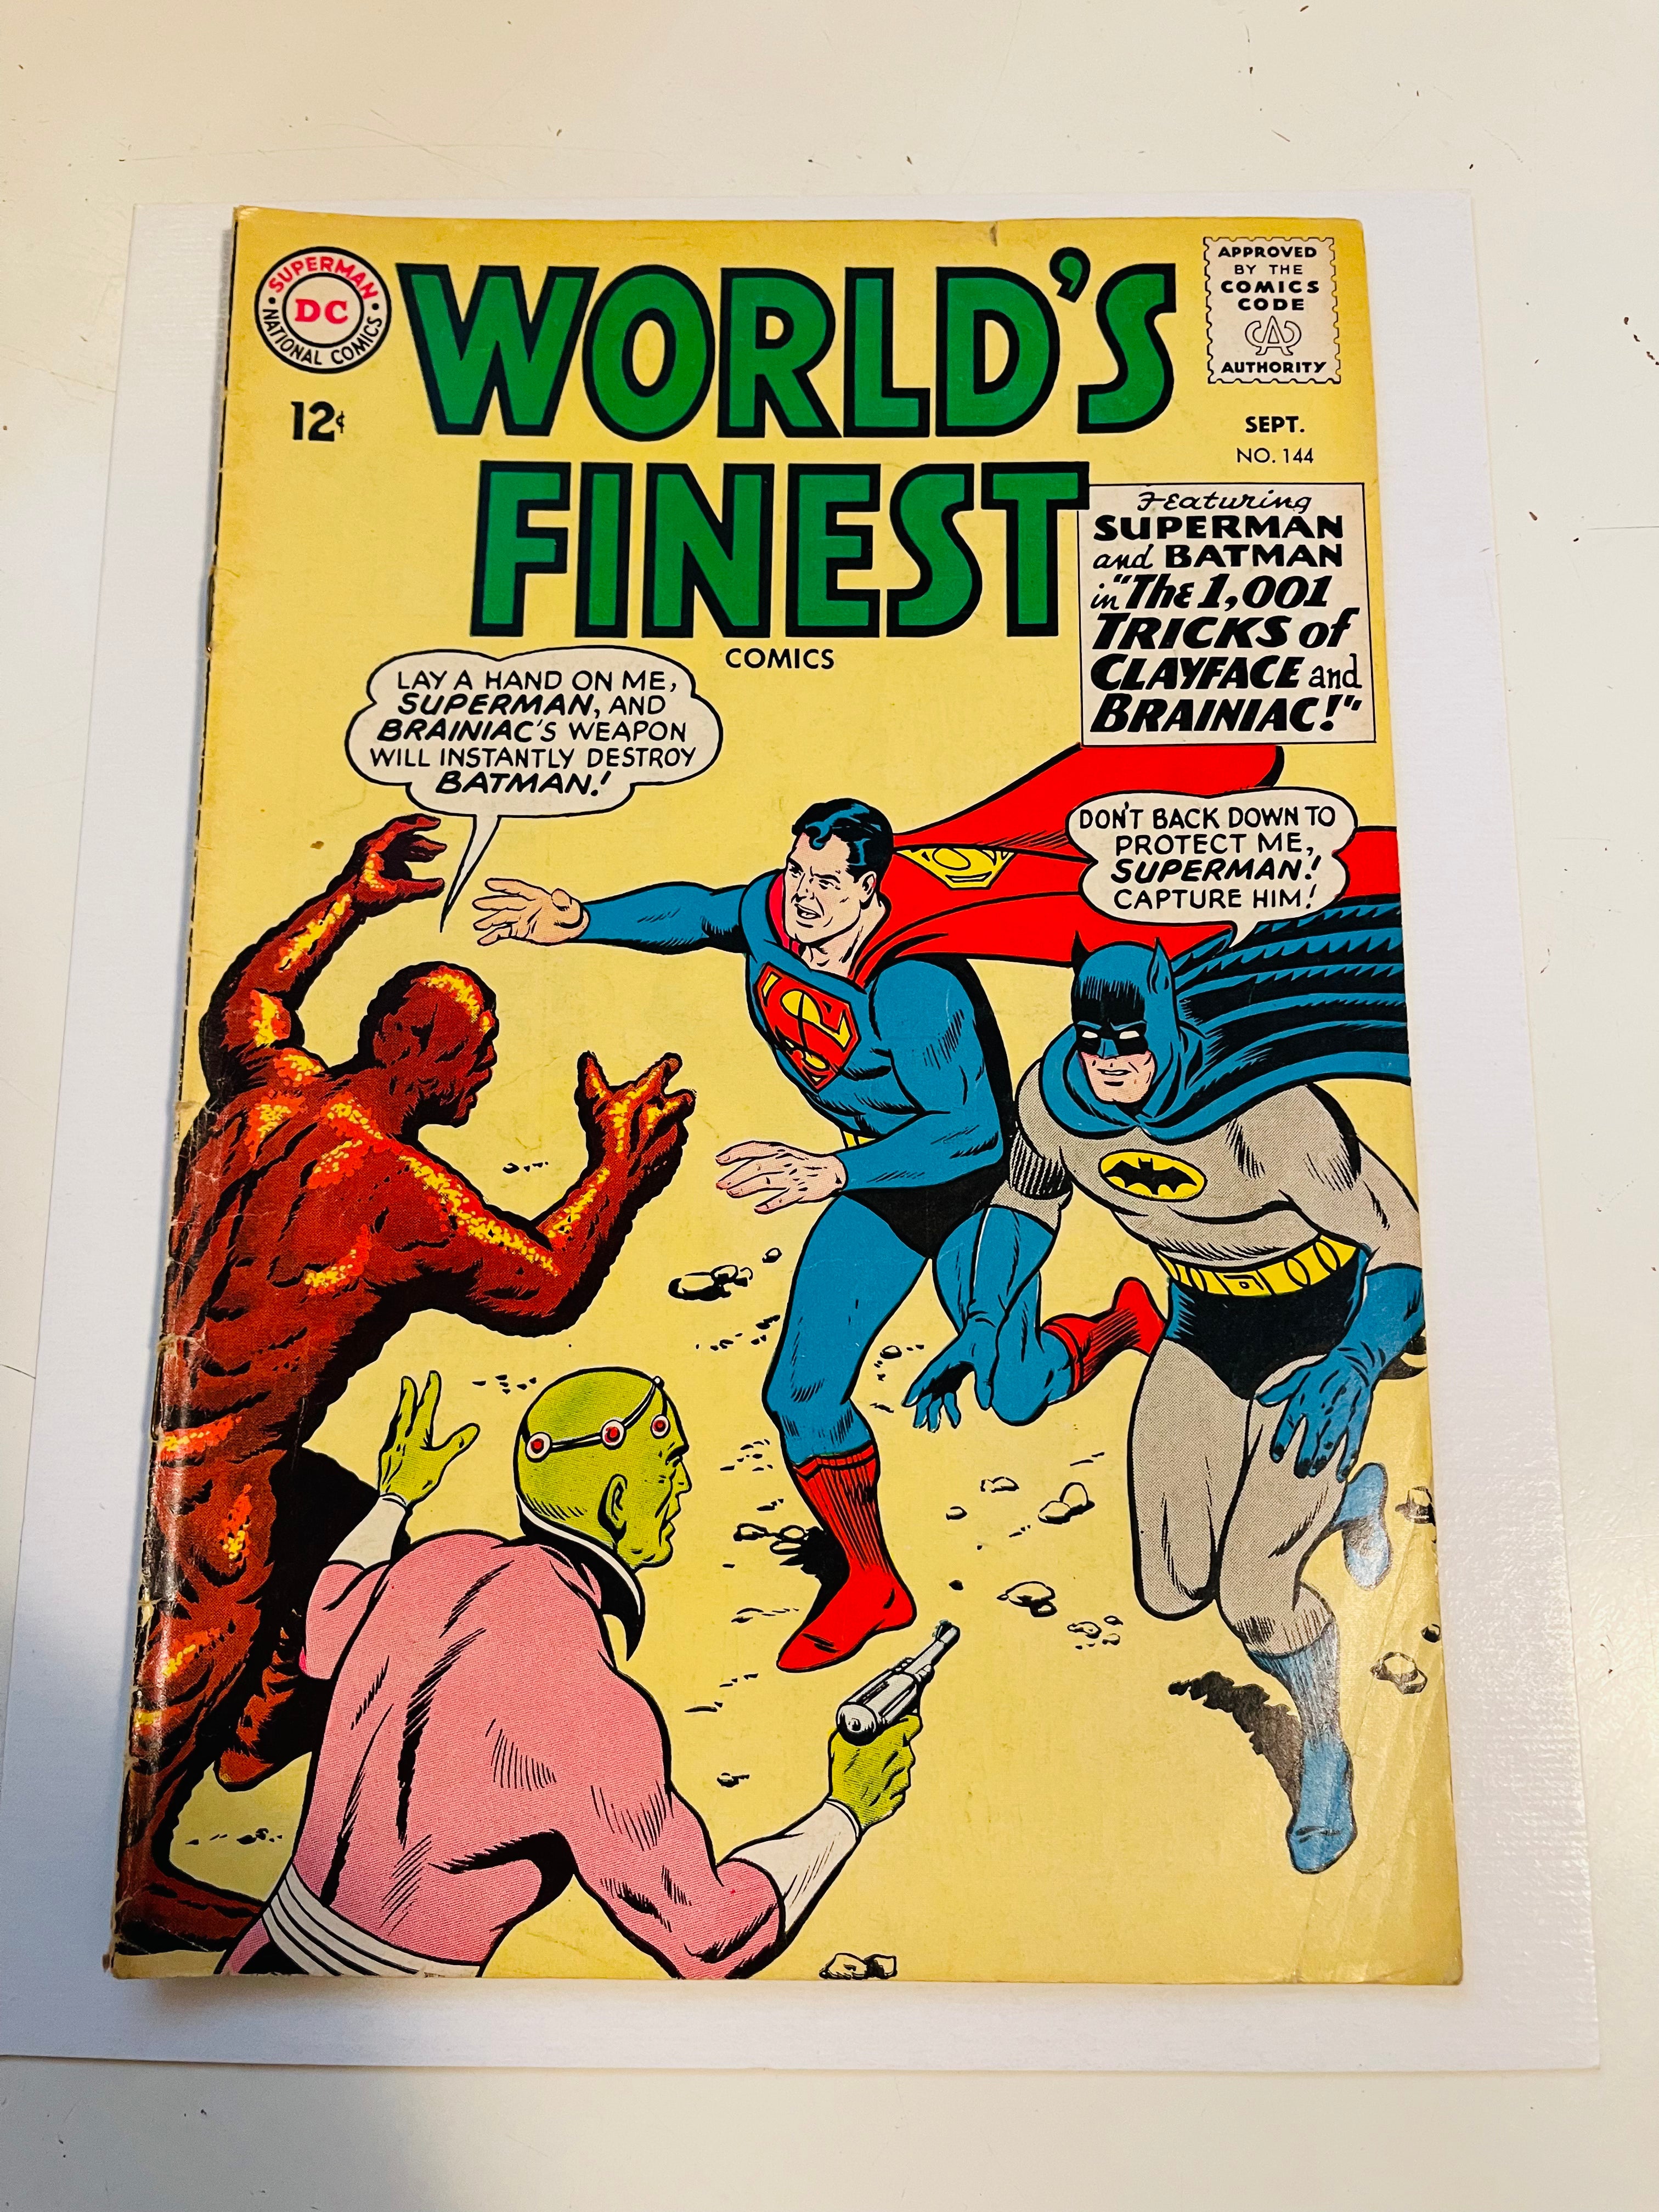 World’s Finest #144 vg condition comic book 1964